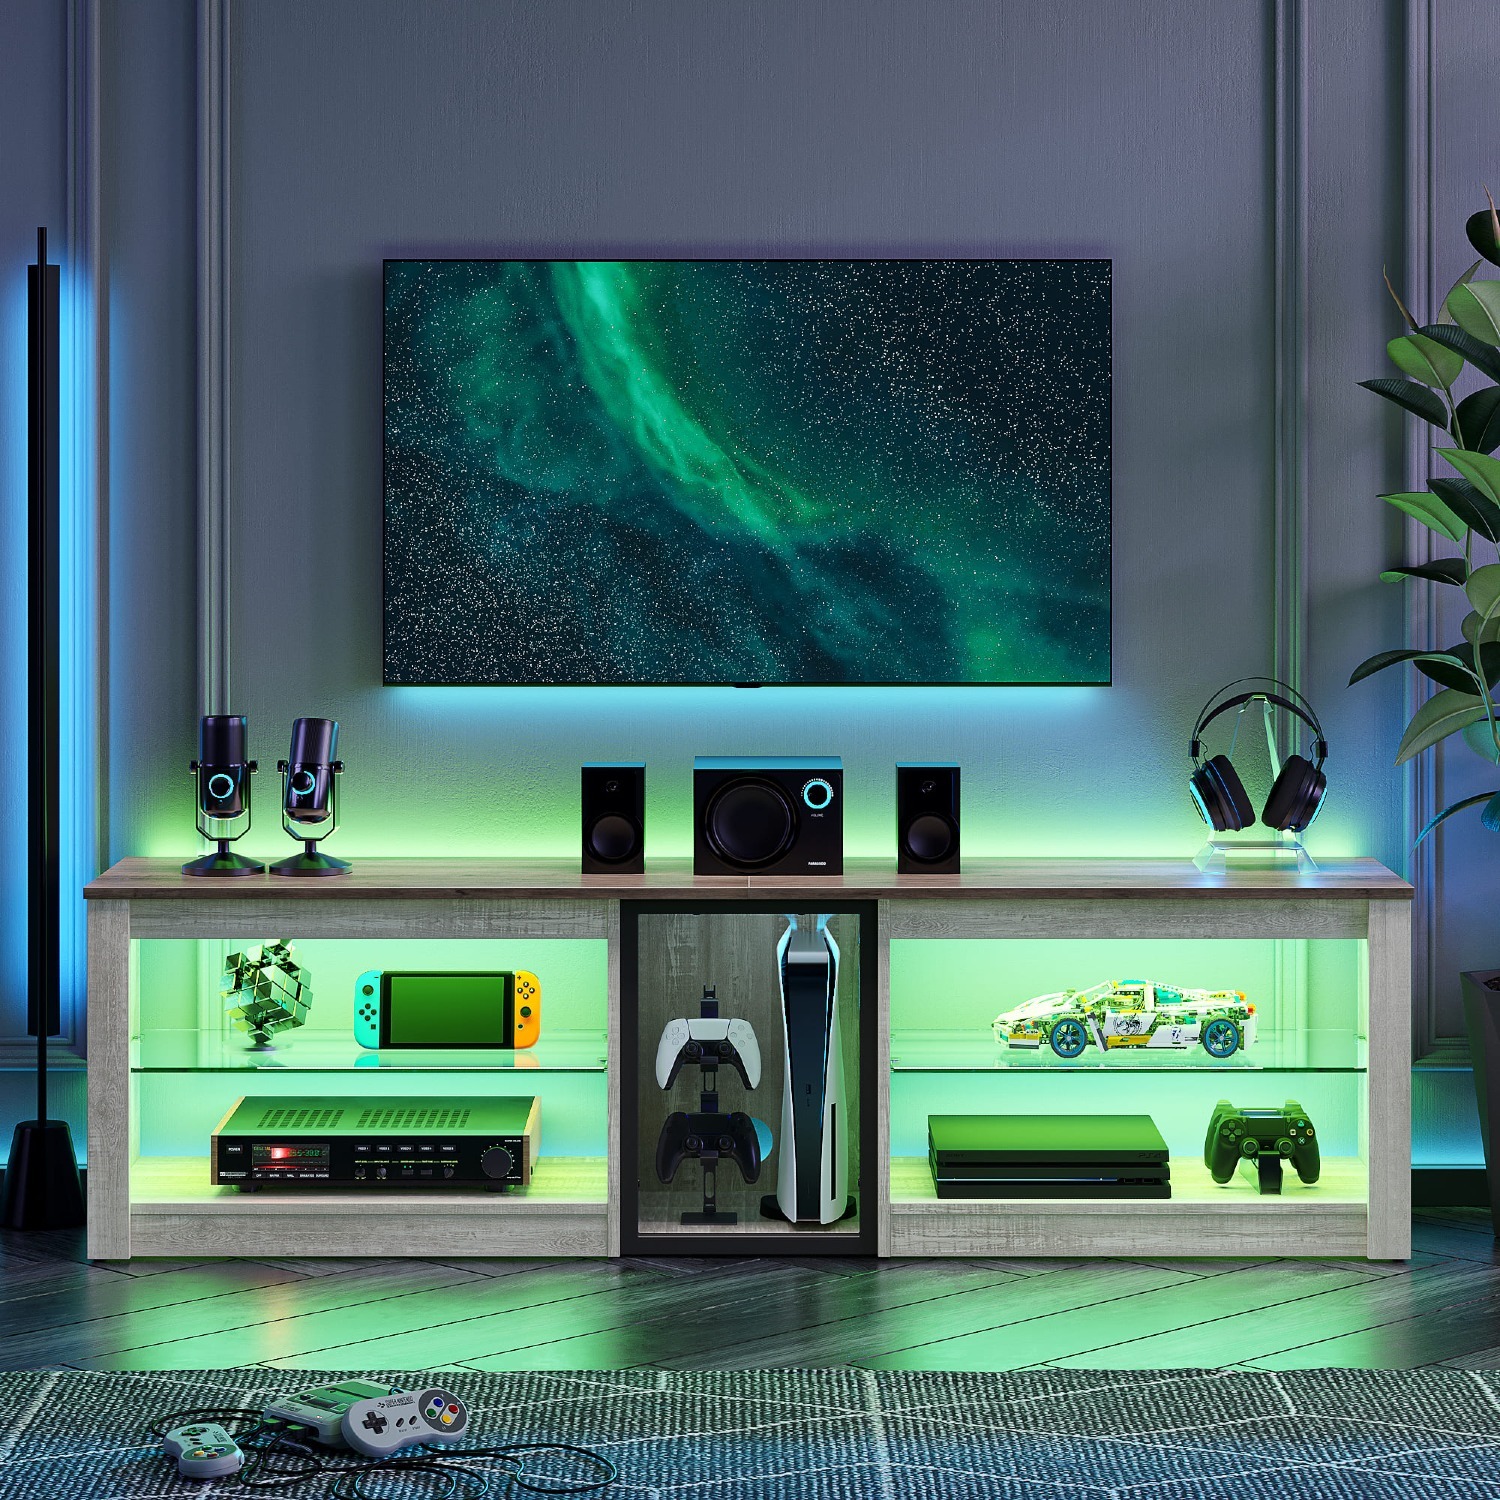 63" Bestier 5-Shelf Entertainment Center w/ LED Lights (Fits Up to 70" TVs) $116 + Free Shipping